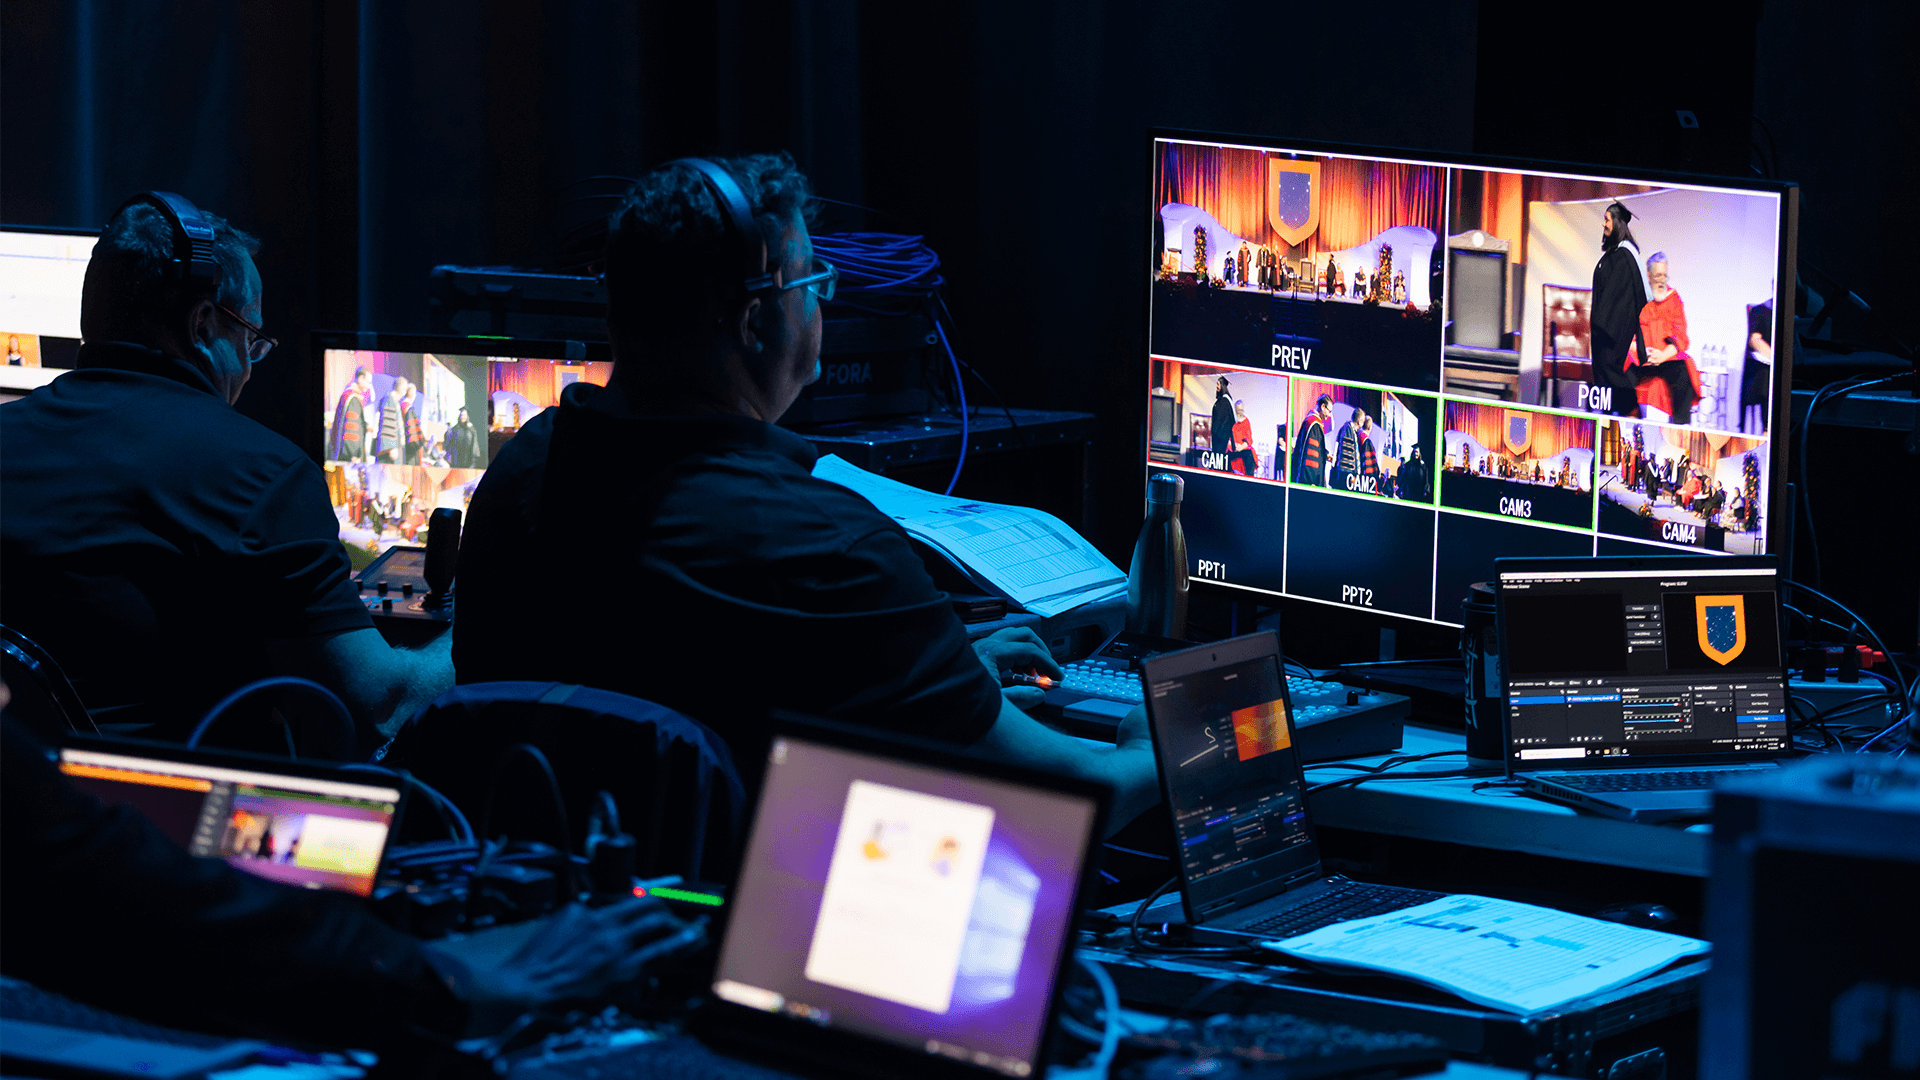 clost up backstage shot of a technician sitting at a station with a television monitor showing multiple camera angles